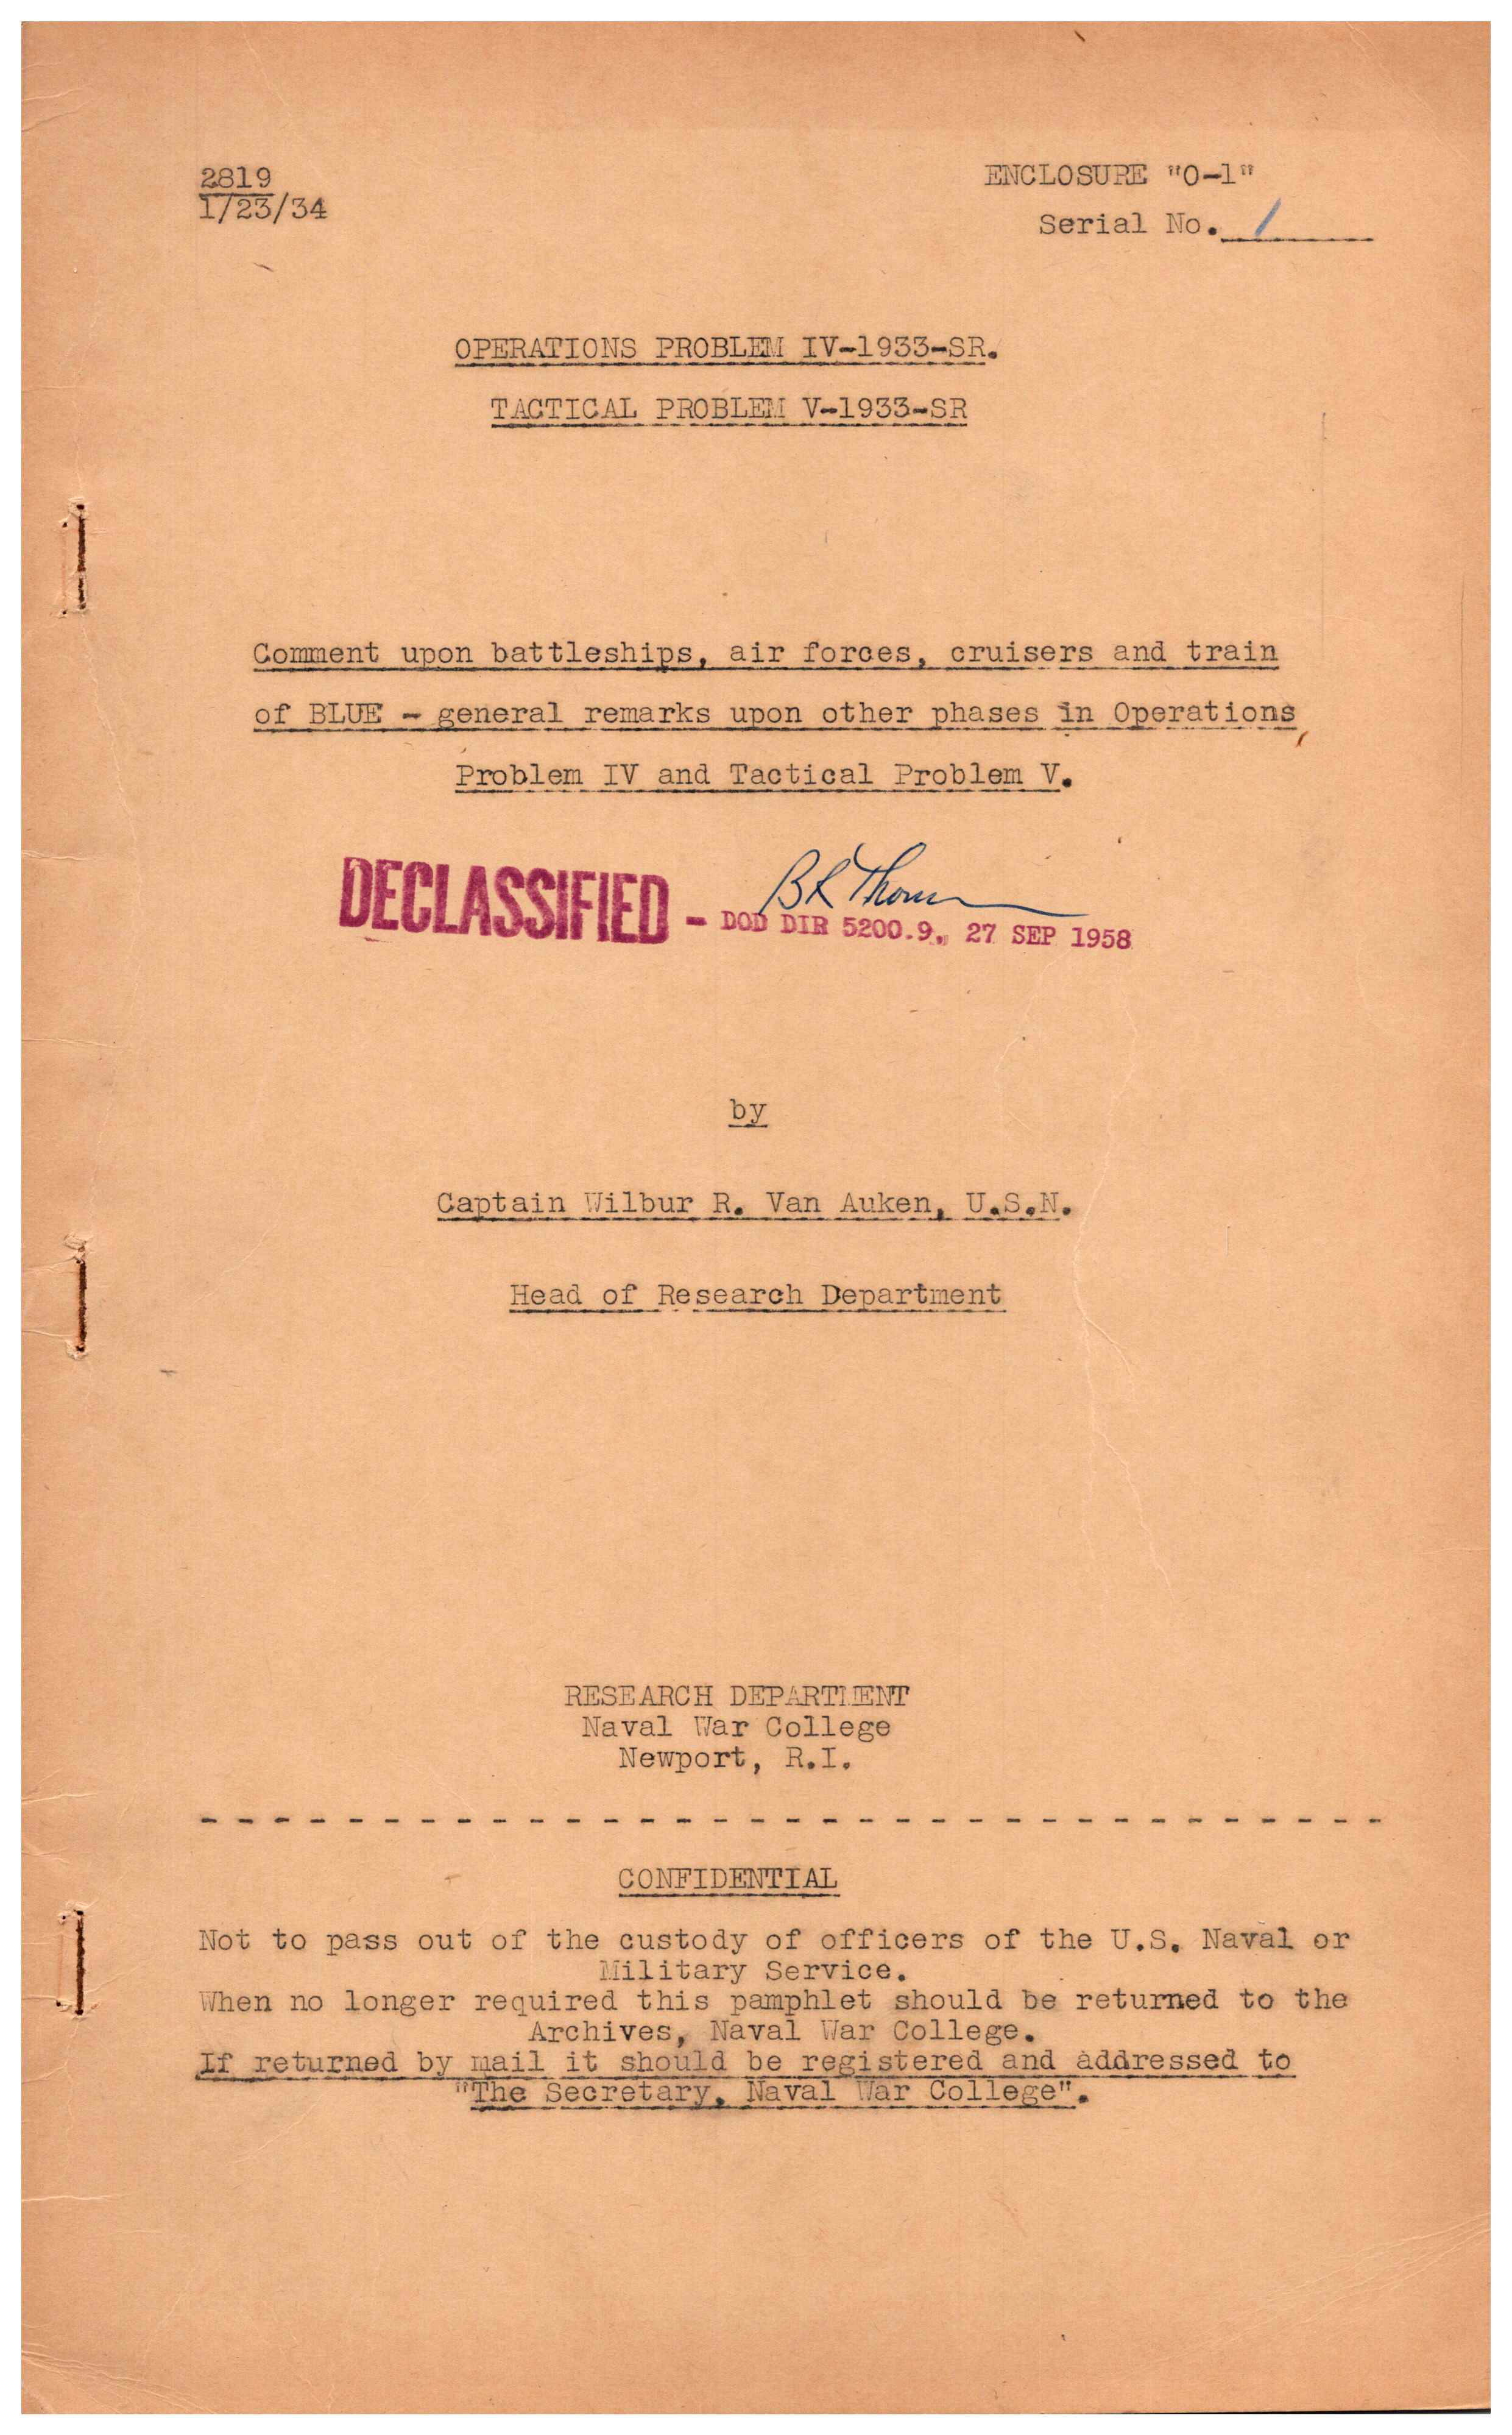 Comment upon battleships, air forces, cruisers and train of BLUE - general remarks upon other phases in Operations, Problem IV and Tactical Problem V by Captain Wilbur R. Van Auken